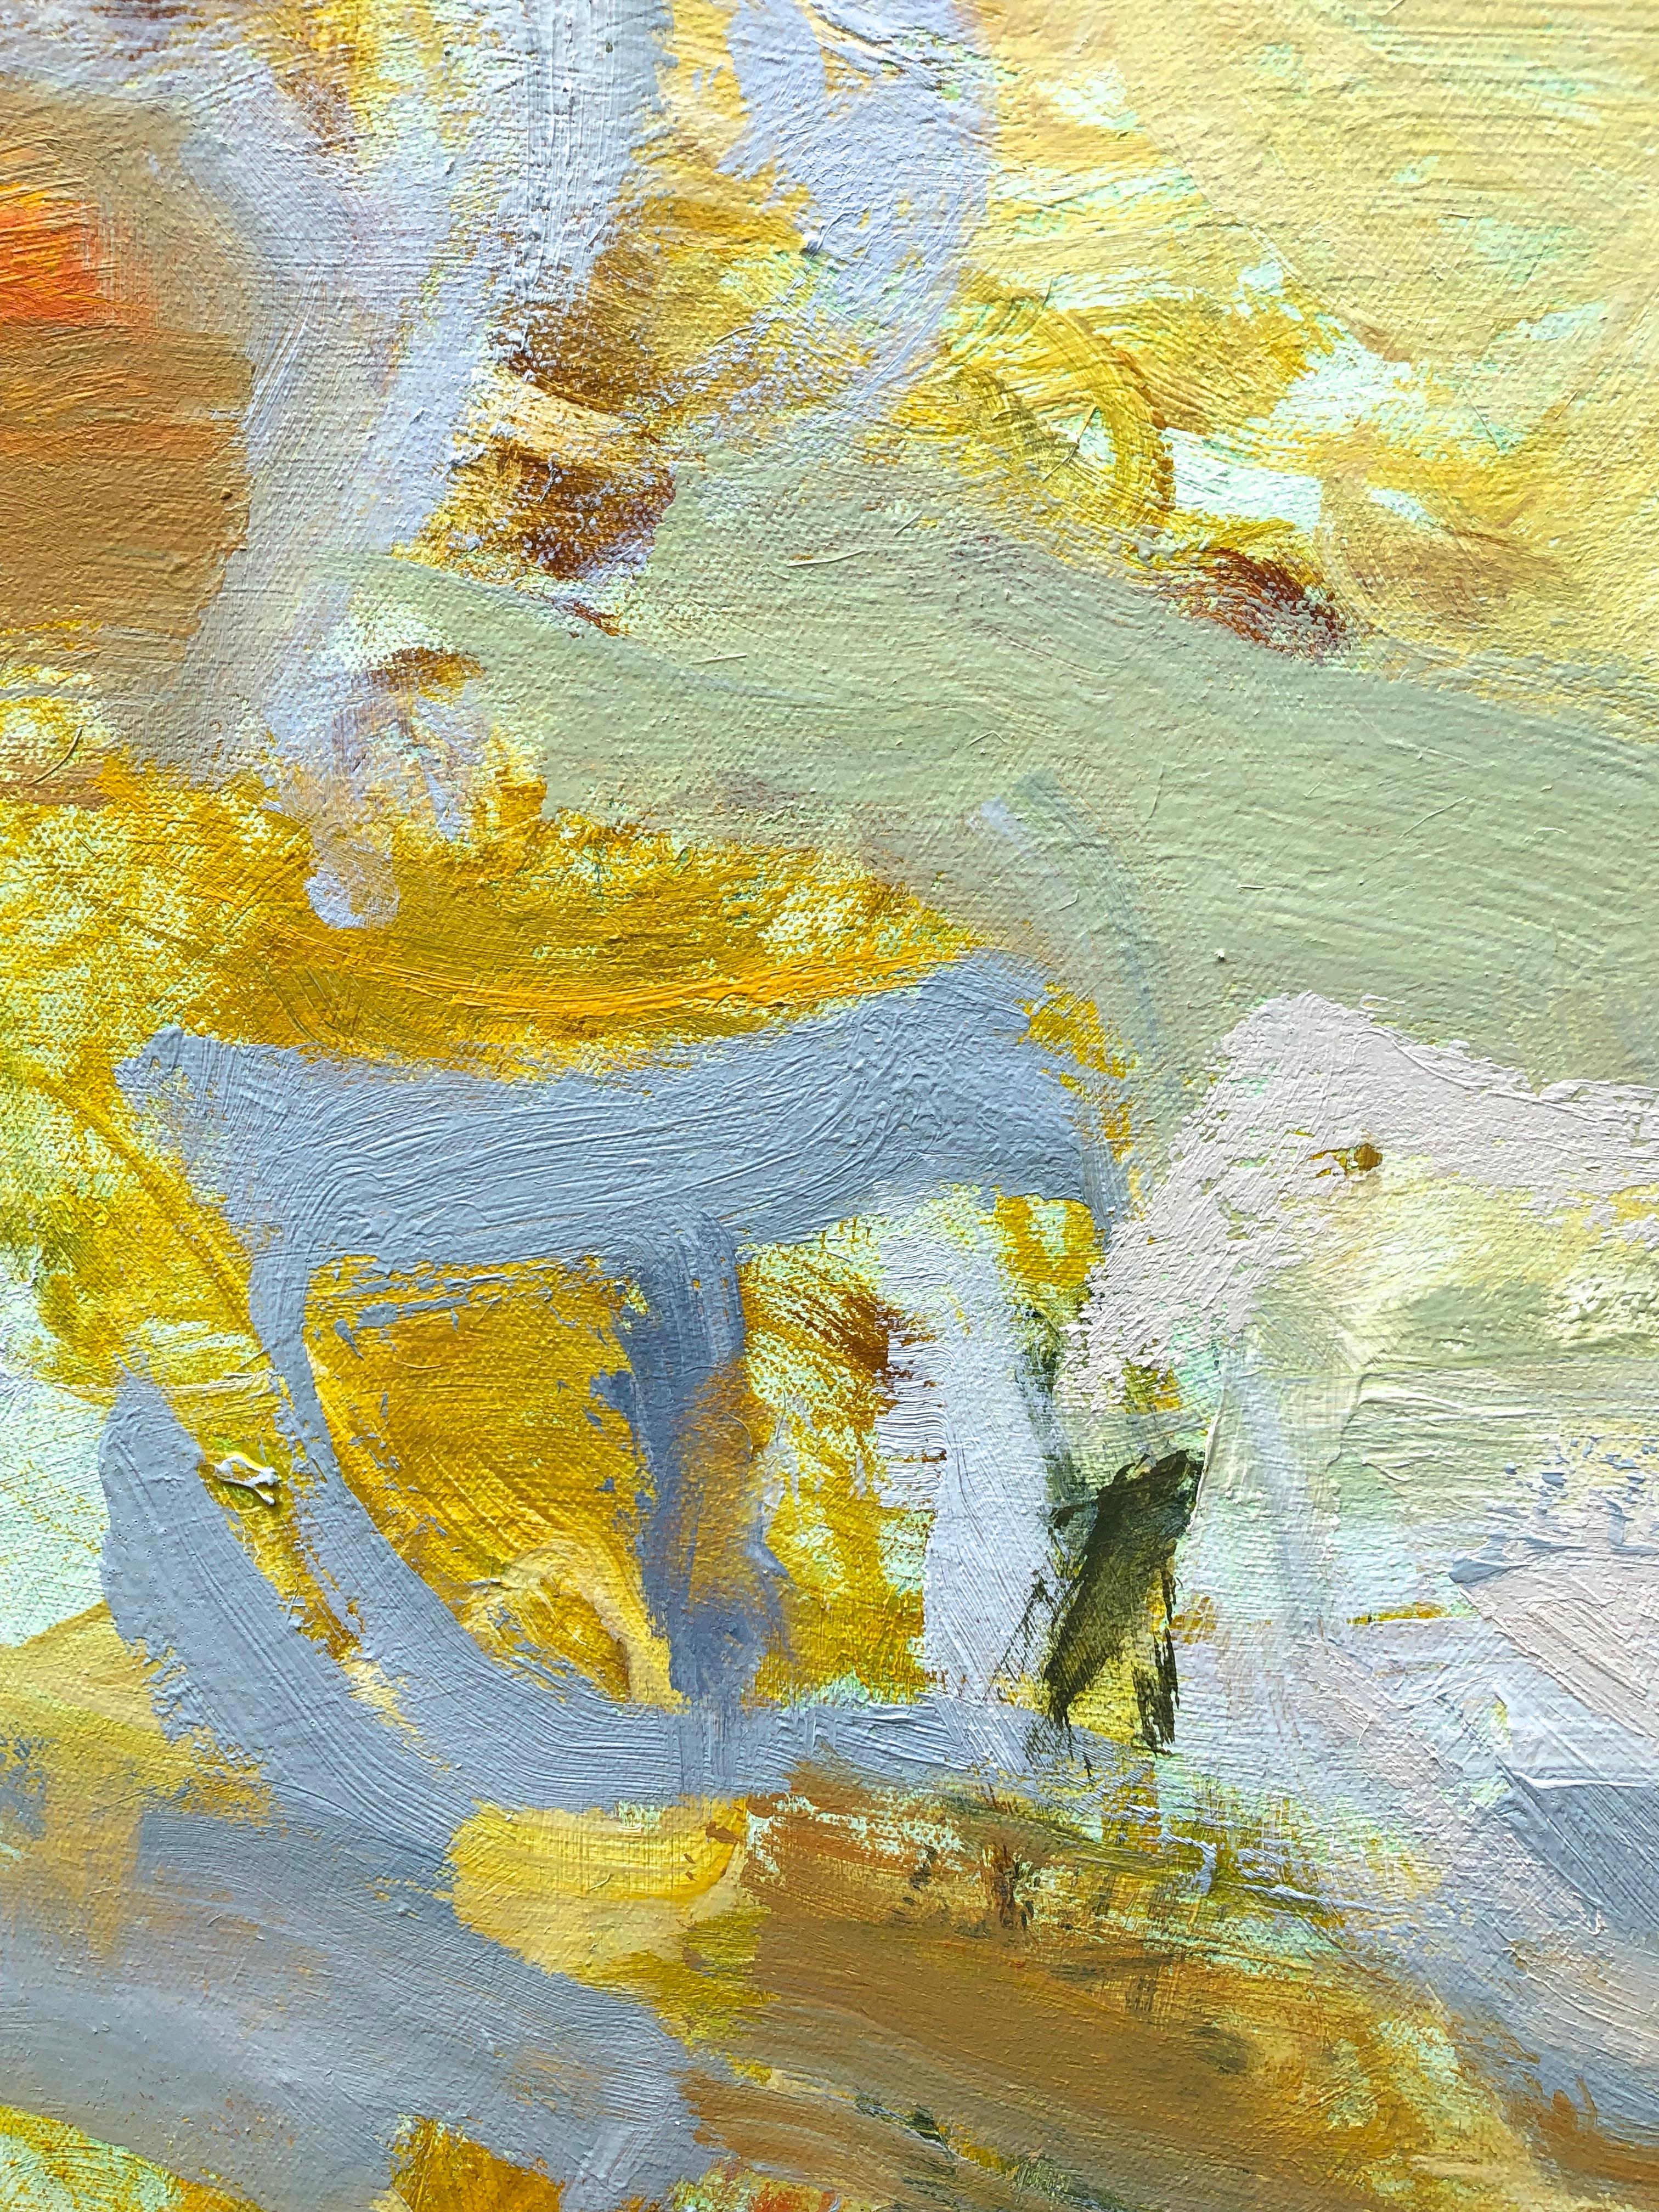 Anne Raymond's work turns outward to the natural world and is inspired by nature and the transitory quality of changing light. Sky, water and motion are recurring themes. This painting nods to the yellows found in early DeKooning paintings, and